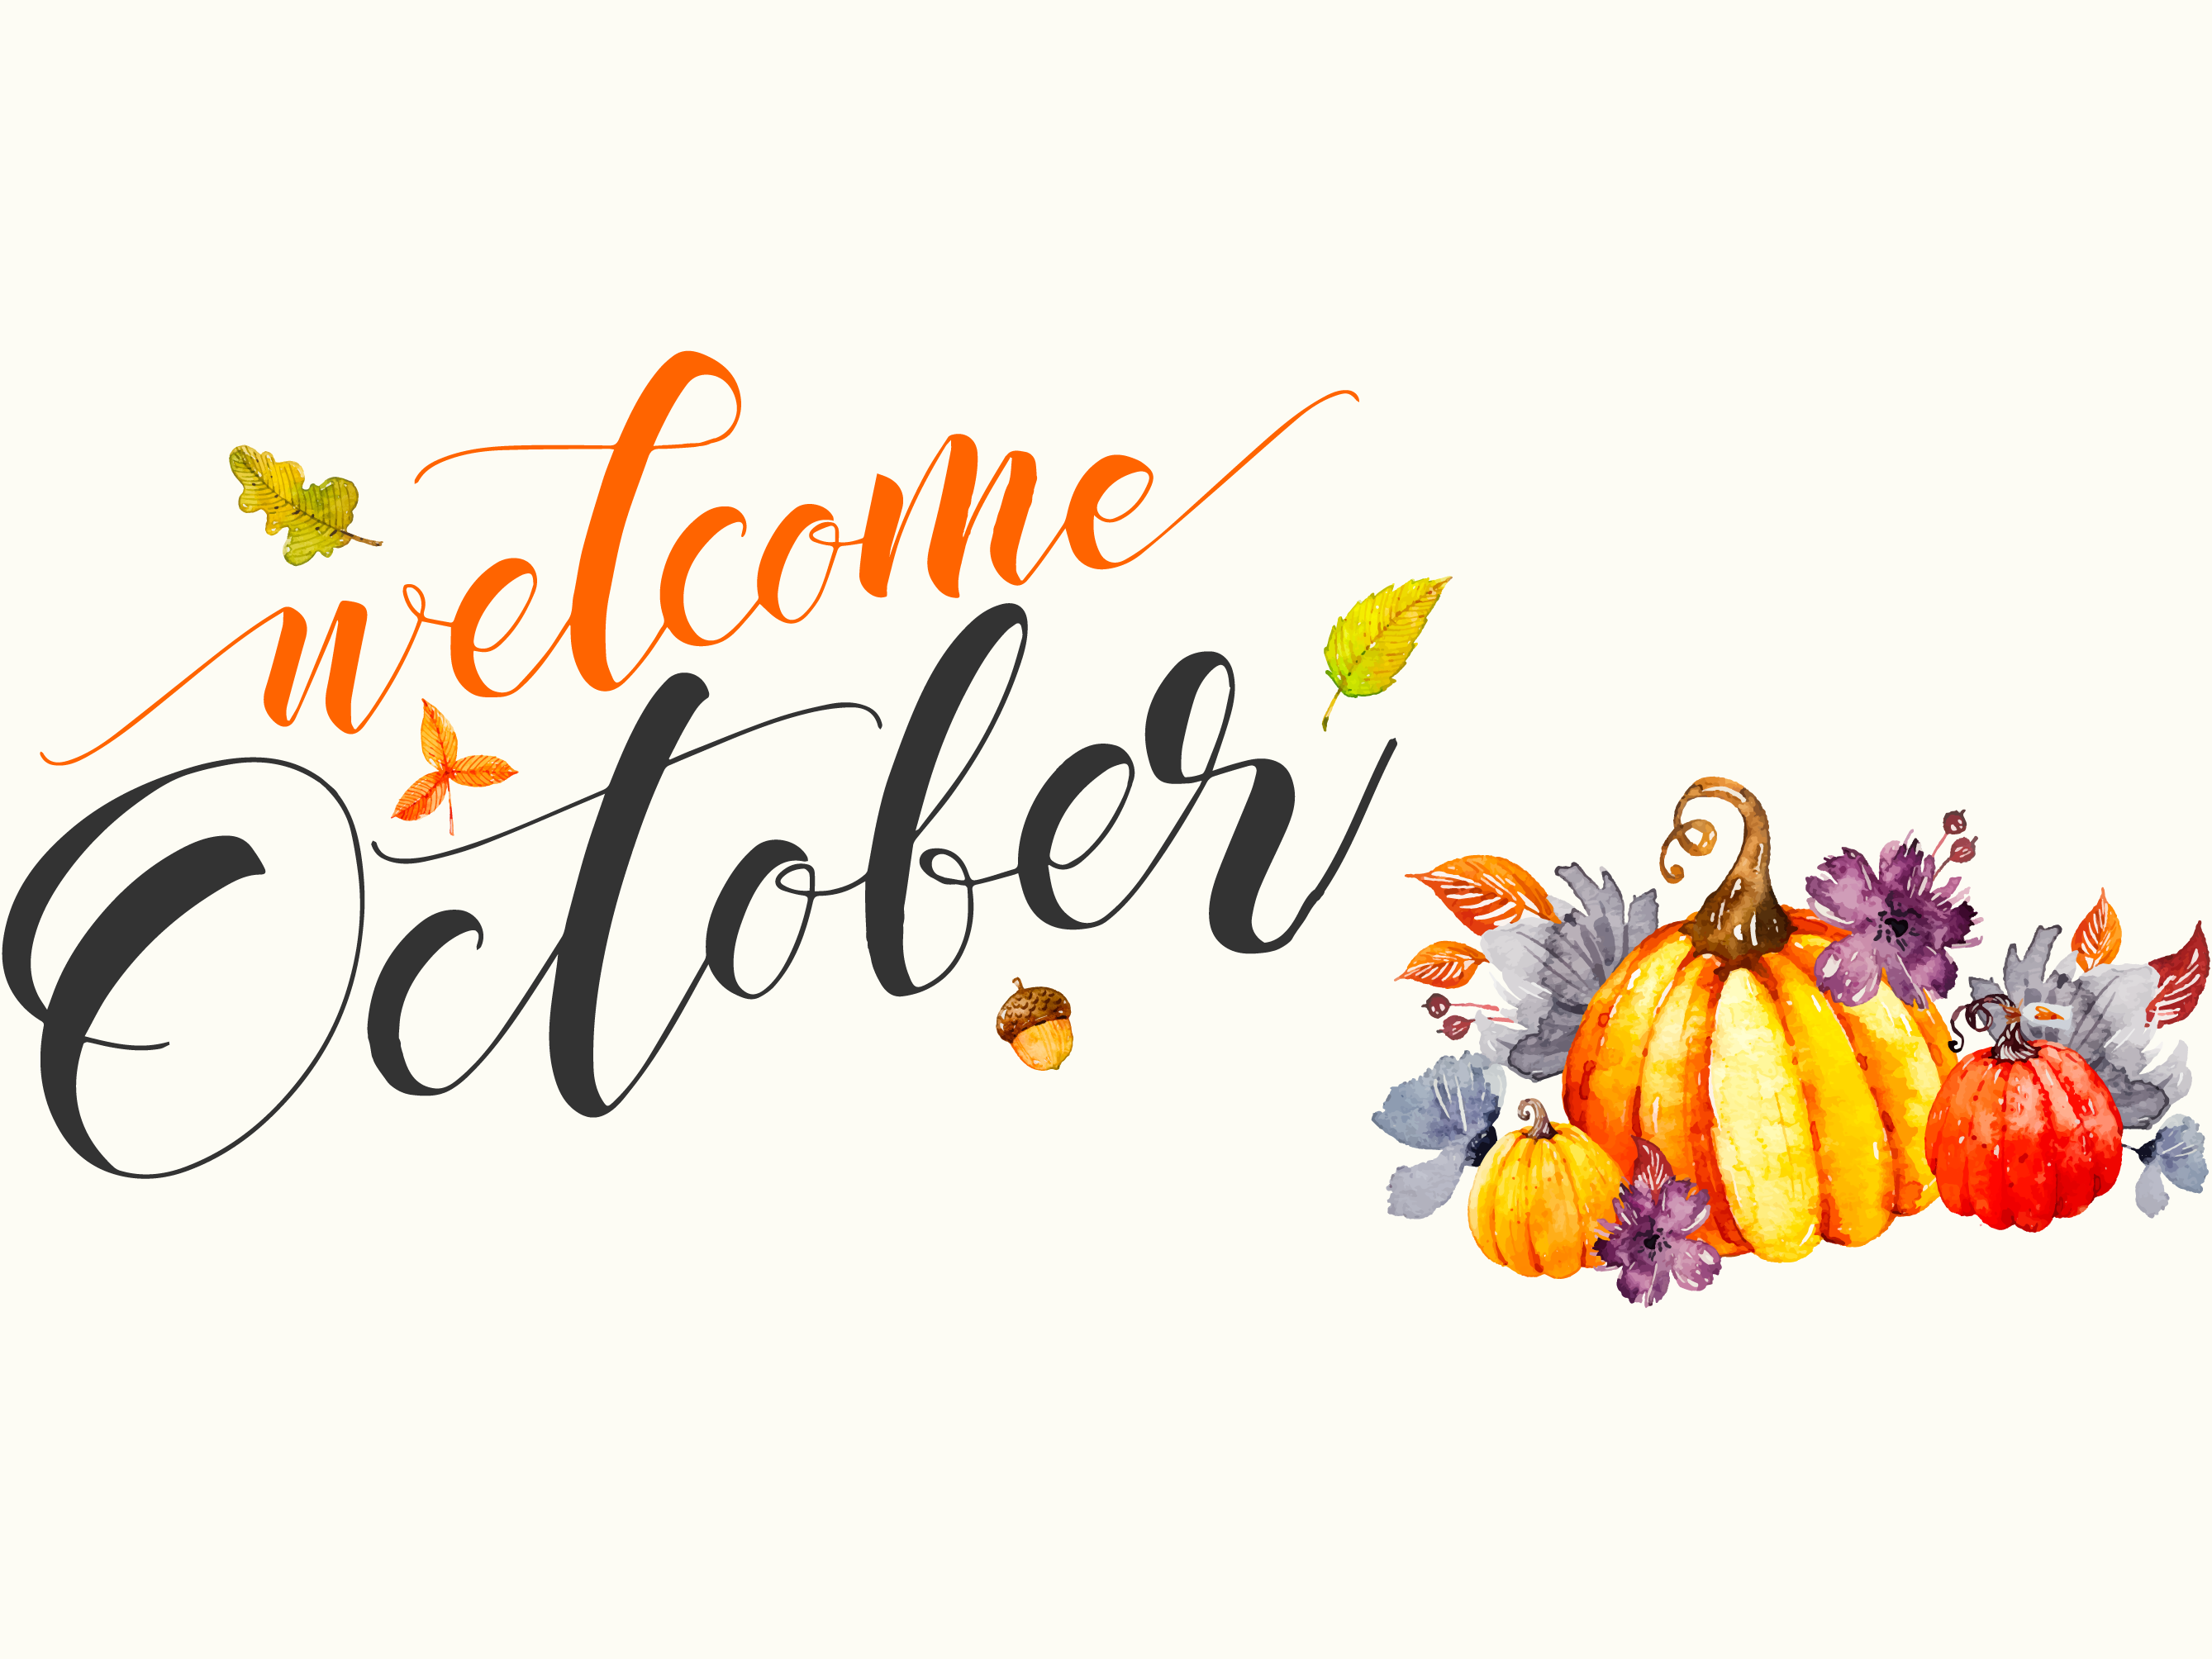 October! by Cromatix Creative Image Lab on Dribbble